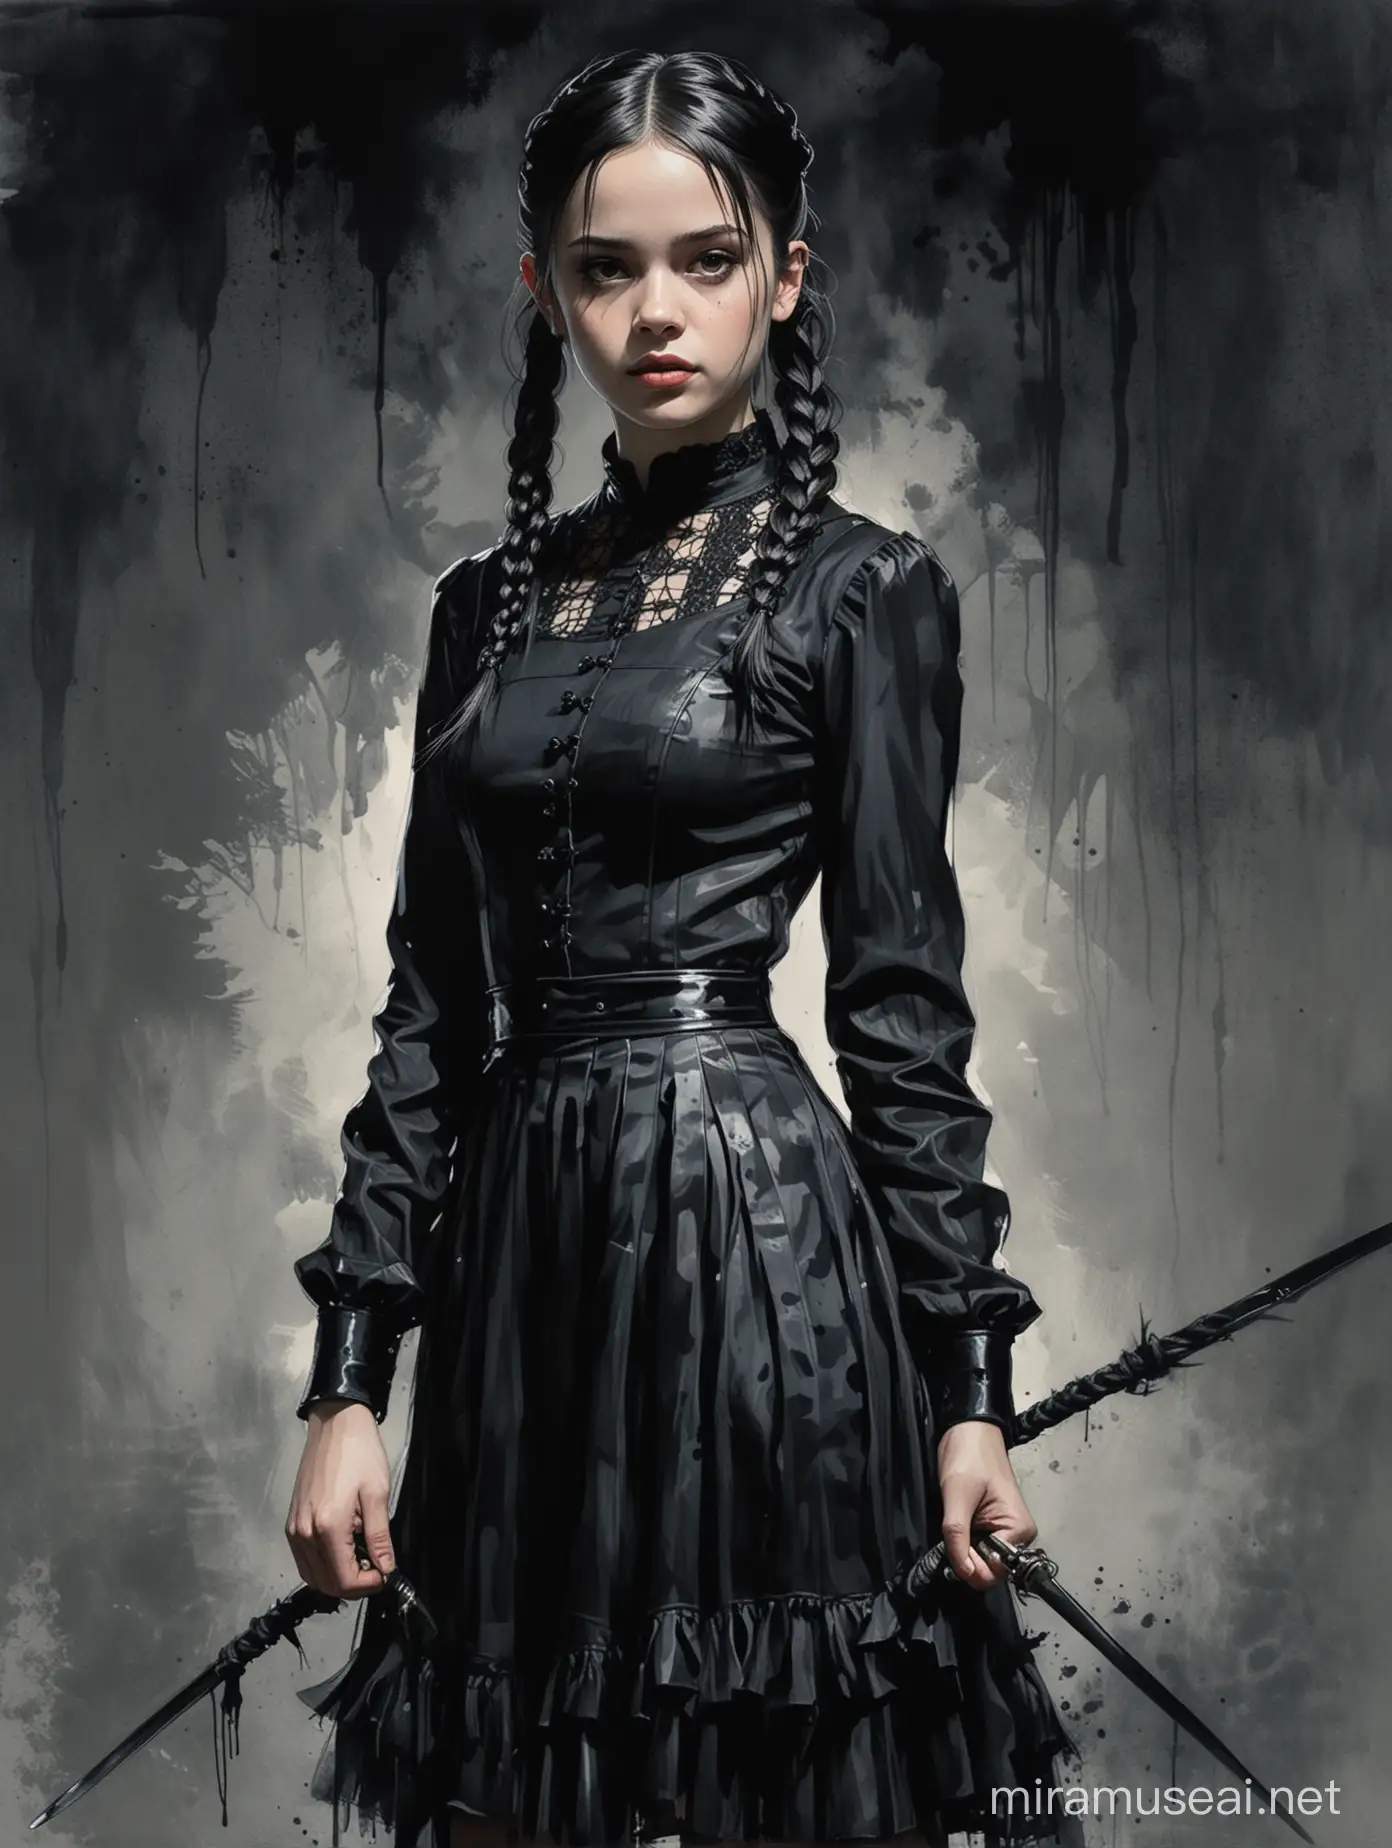 Alex Maleev illustration depicting very pale Jenna Ortega as Wednesday Addams wearing full black fencing dress with ragged shoulder frills and long sleeves, long flowing skirt, side braids hair with bangs, chiaroscuro, dramatic lighting, messy watercolor, no distortion, gray palette, insanely high detail, very high quality, seen from below, low angle view, forced perspective
